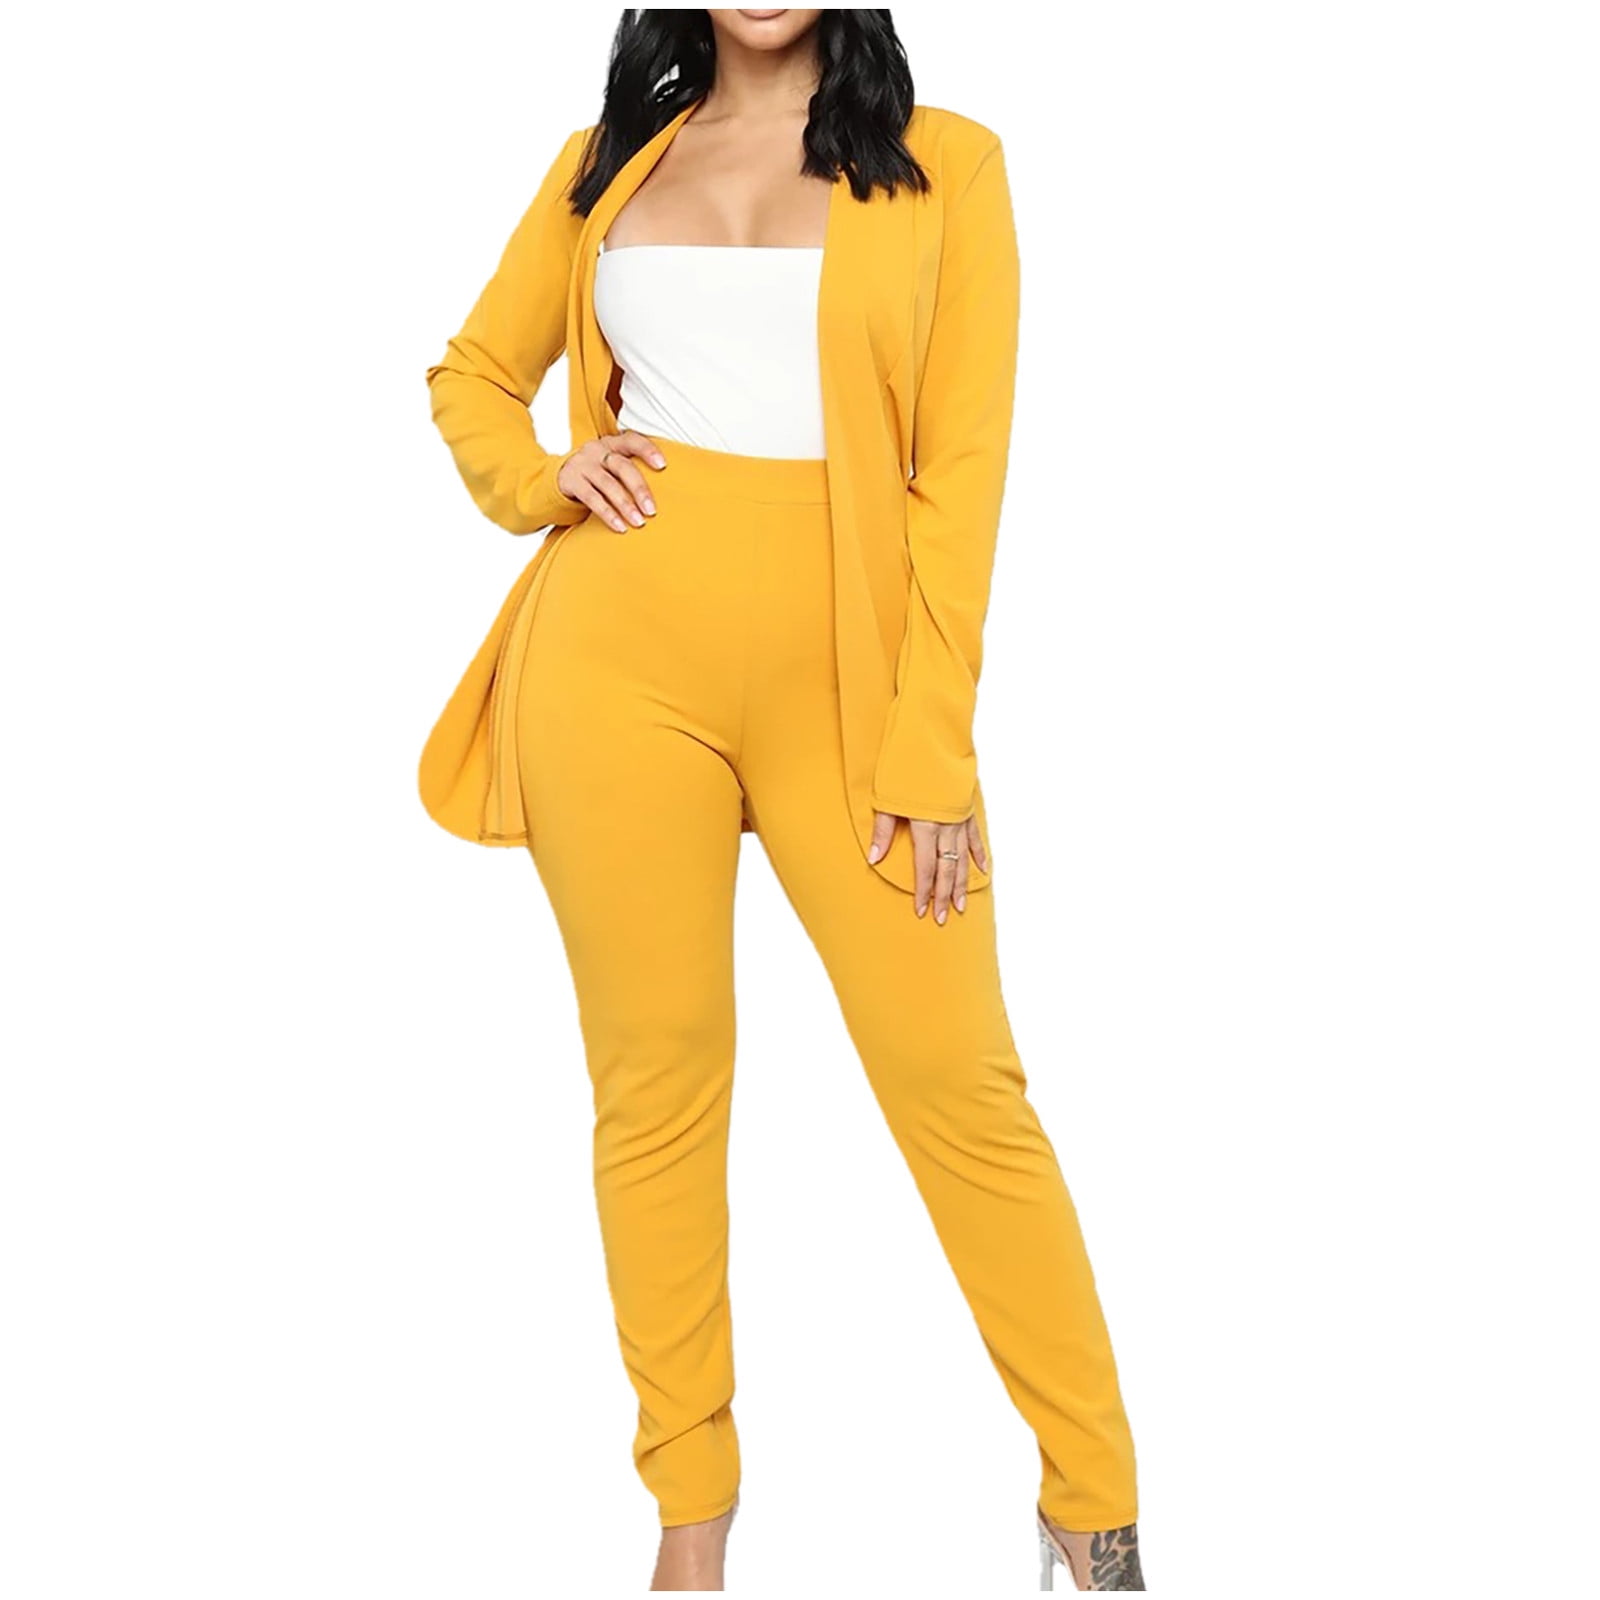 High Quality Double Breasted Yellow Pants Suit For Women Long Sleeve Blazer  For Business And Office Autumn Foschini Suits For Ladies 200923 From Dou04,  $21.39 | DHgate.Com